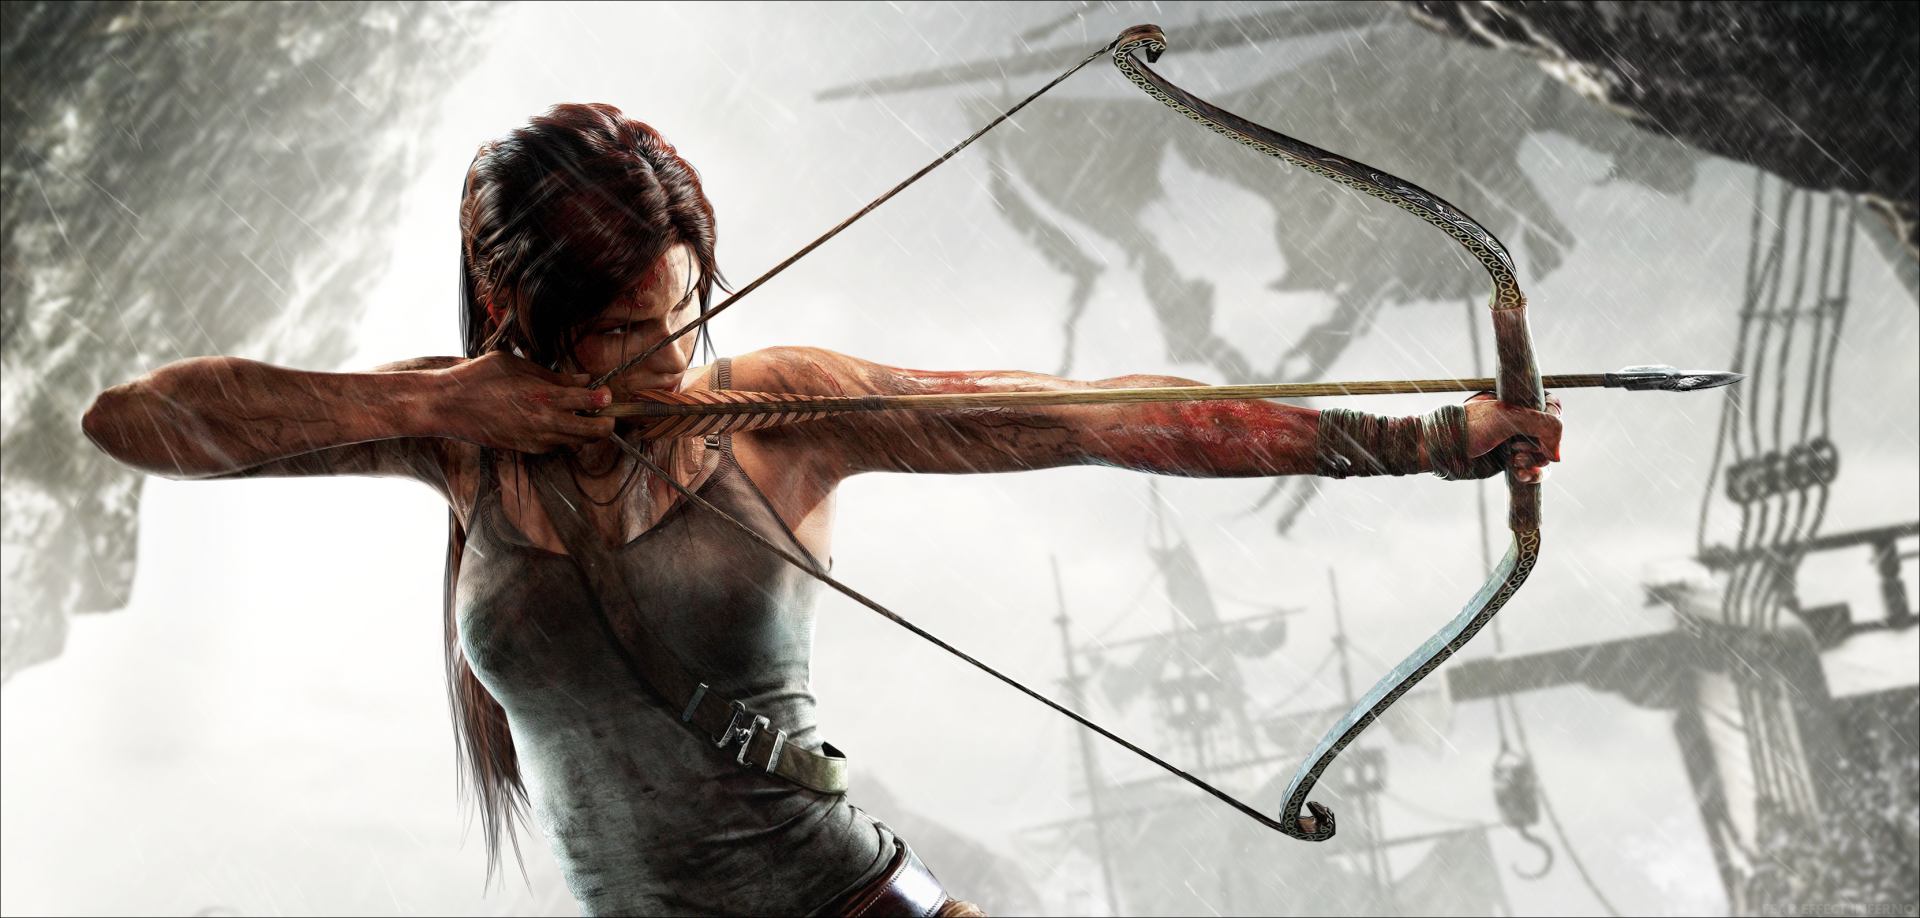 Lara and Nate wallpaper by ethaclane on DeviantArt